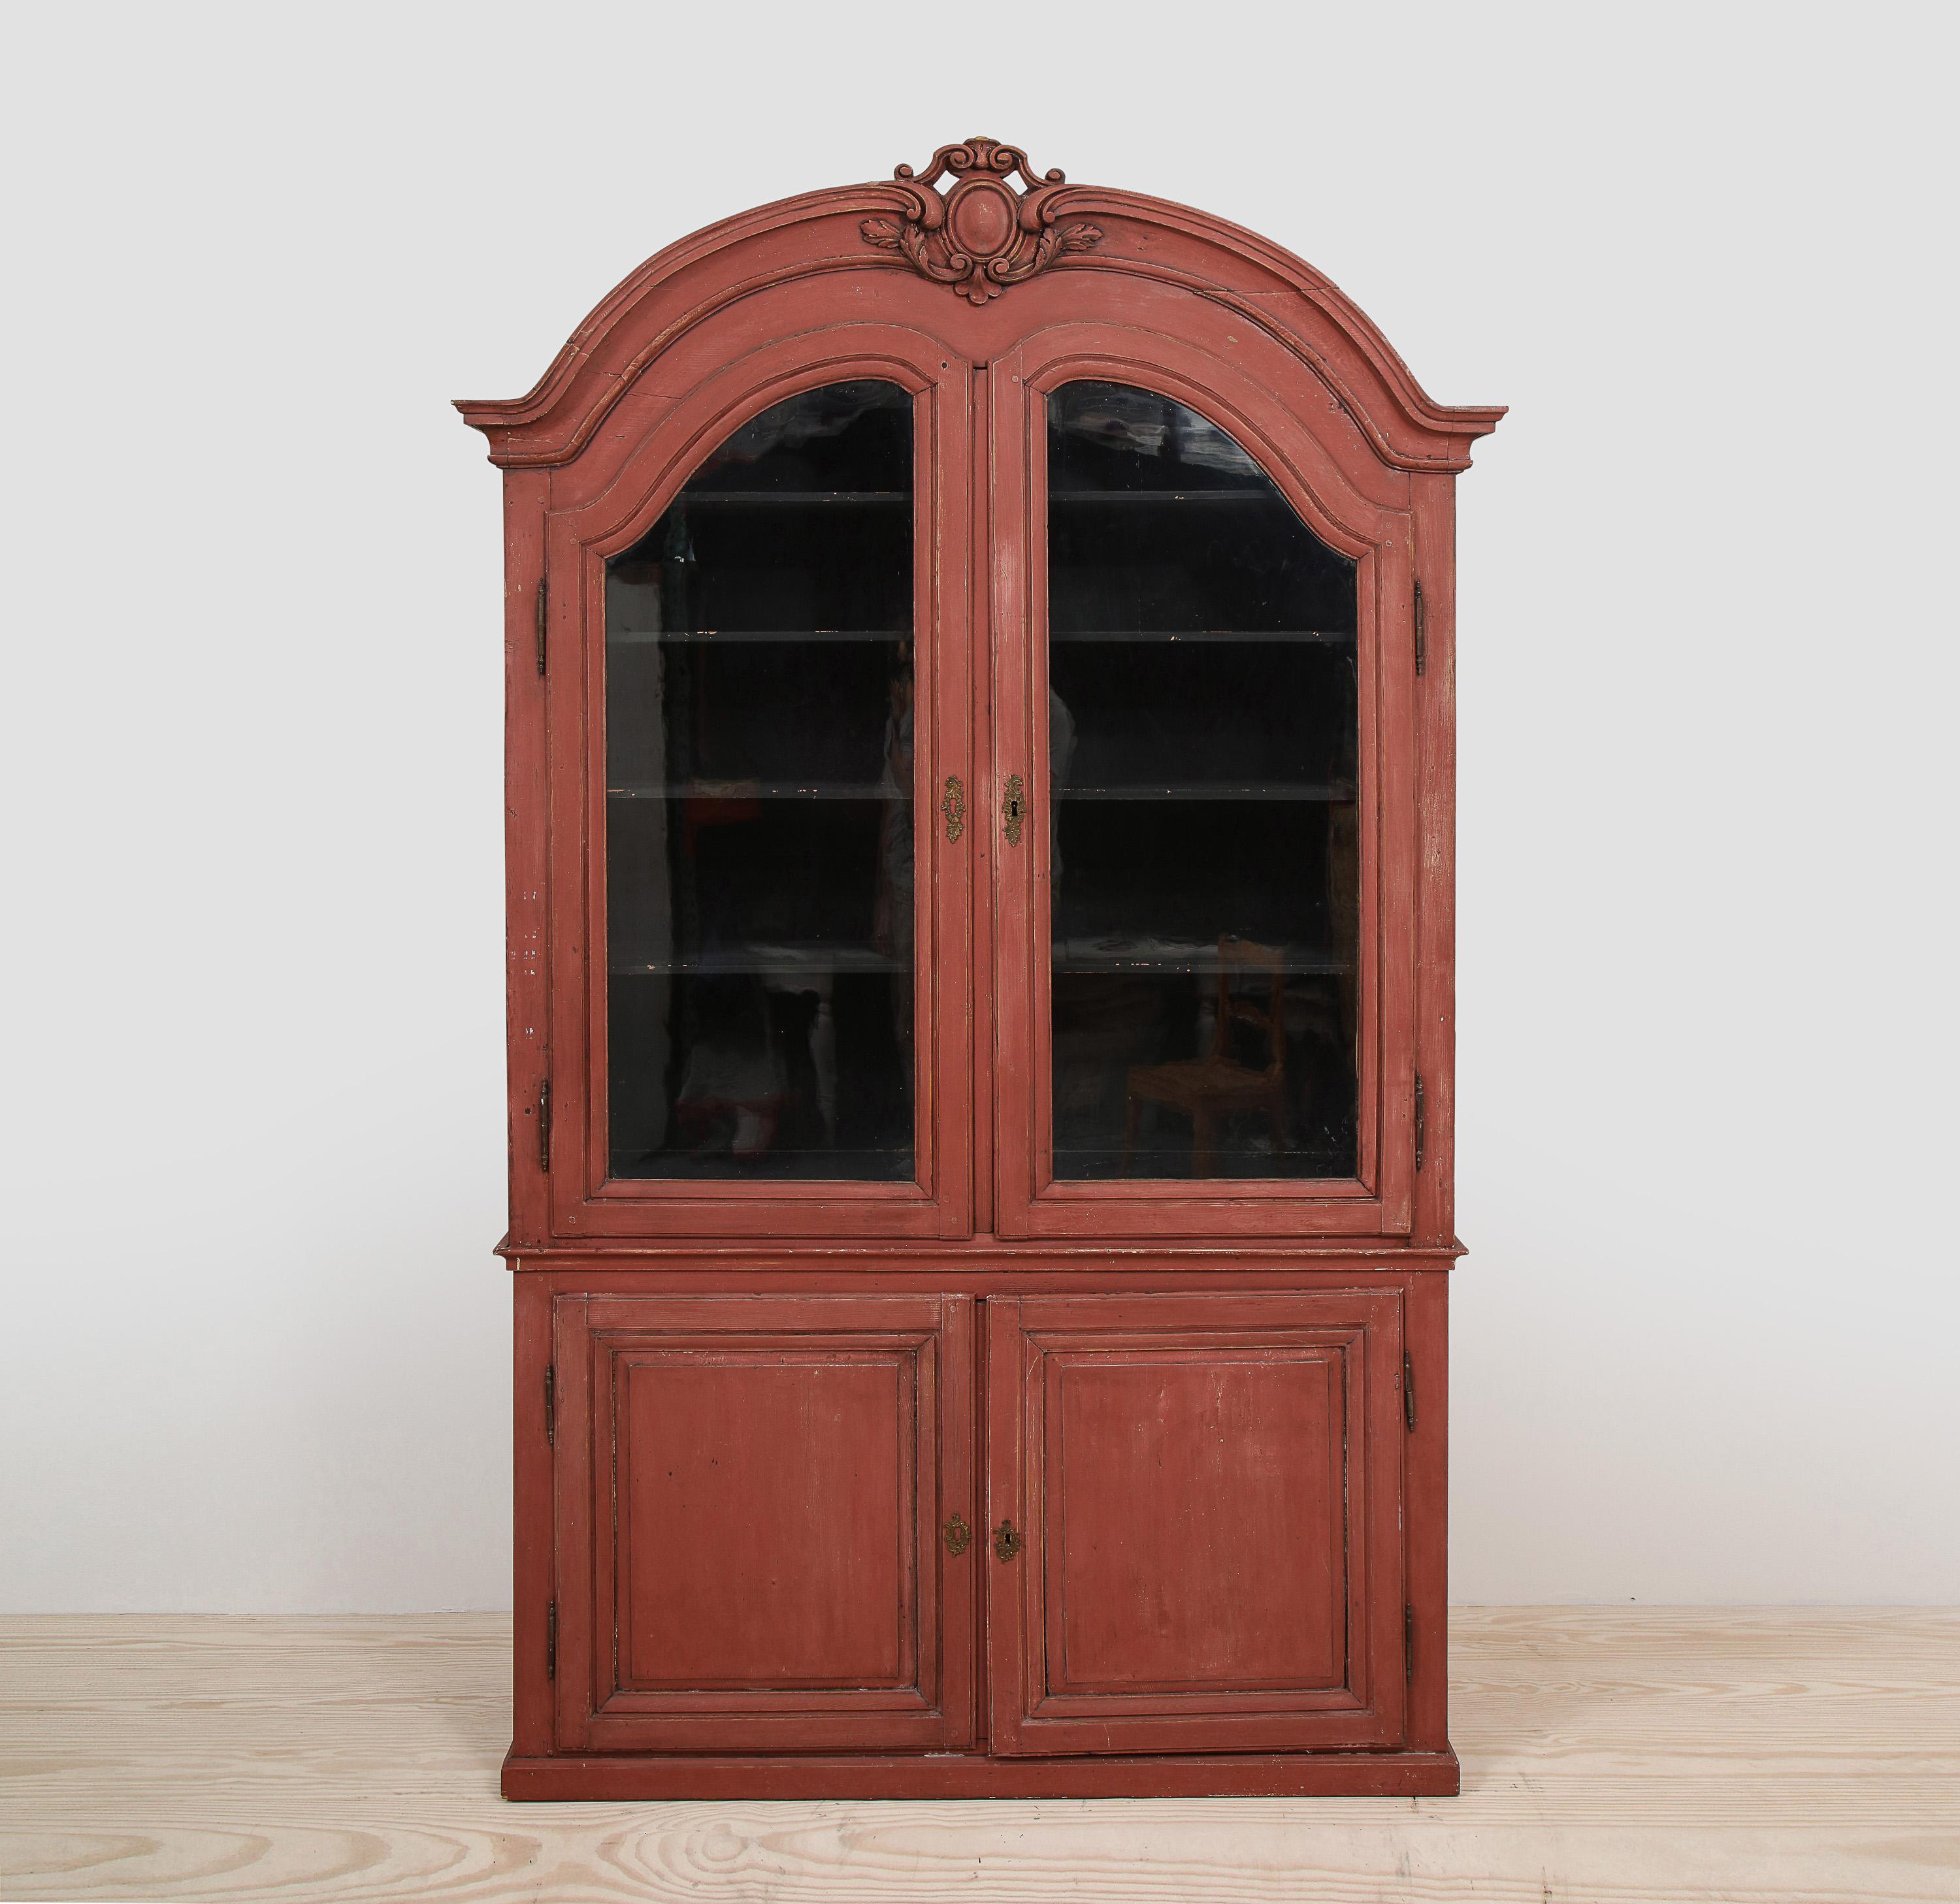 Swedish Rococo 18th century cabinet, origin: Sweden, circa 1760 - 1775, red exterior with glass doors revealing six shelves in a dark grey/blue interior and two cabinets below. Beautiful proportions with hand-carved center cartouche. 

The purity of